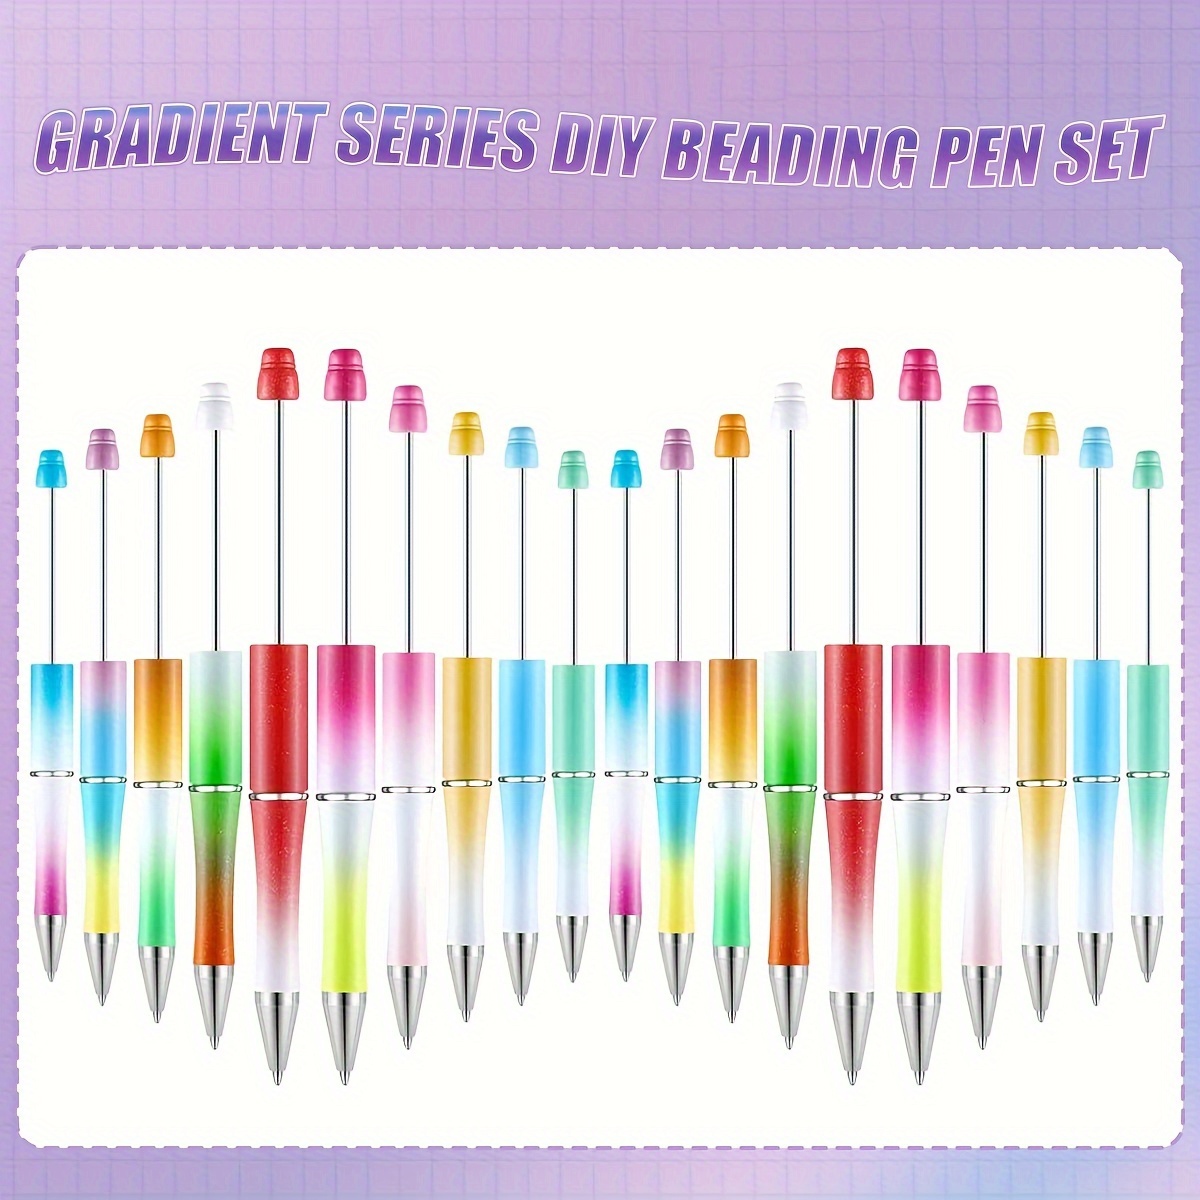 

20pcs Gradient Series Diy Beaded Pen Set Home Office Beaded Pen Fun Gift Diary Gift Pen Birthday Gift Party Gift Without Beading (black Ink)